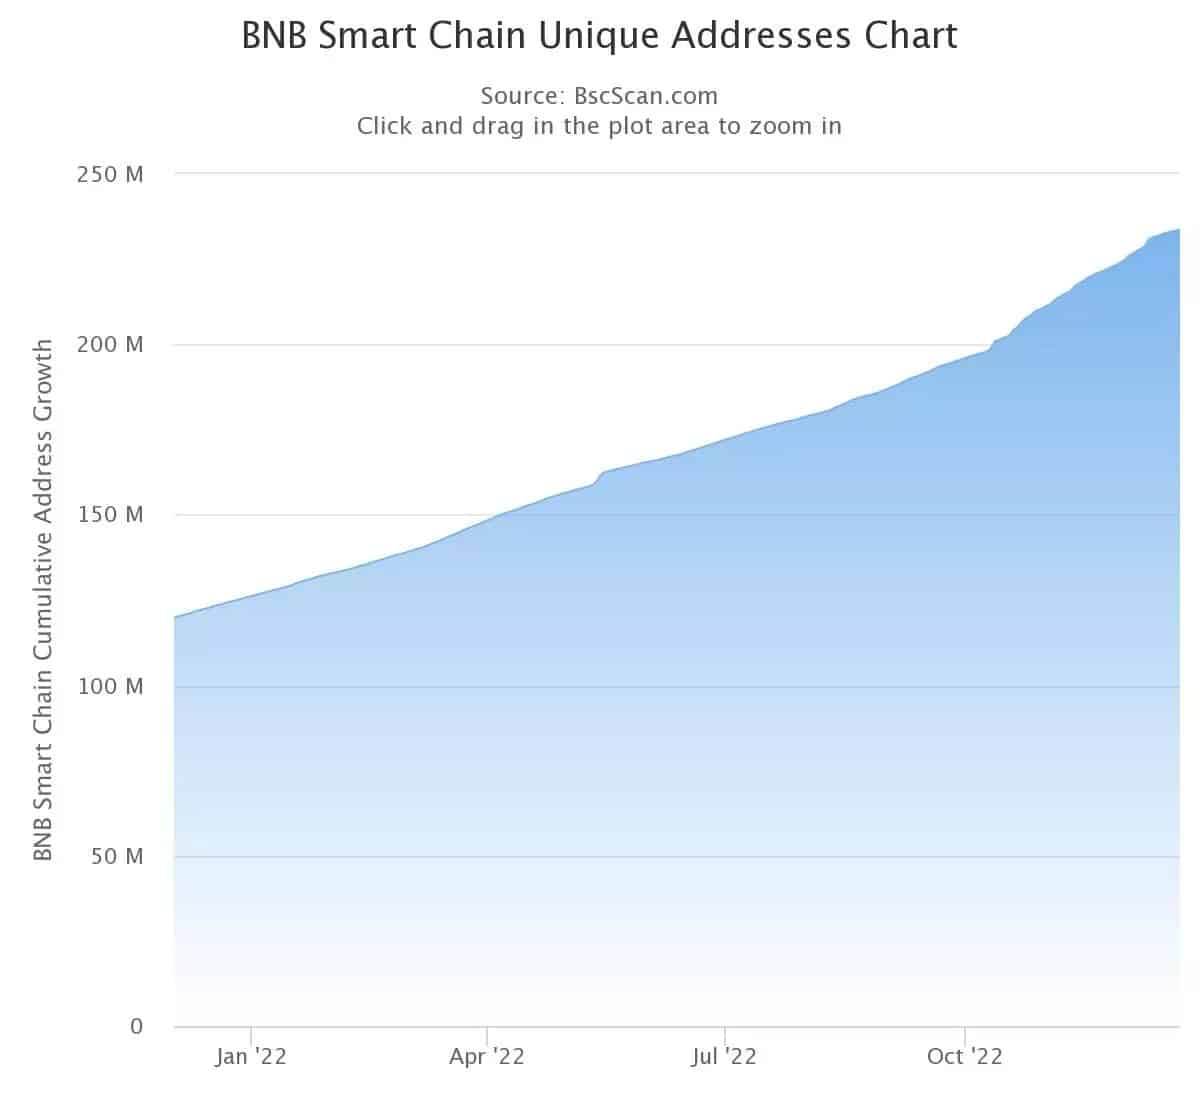 Evolution of the number of unique addresses on the NBB Chain